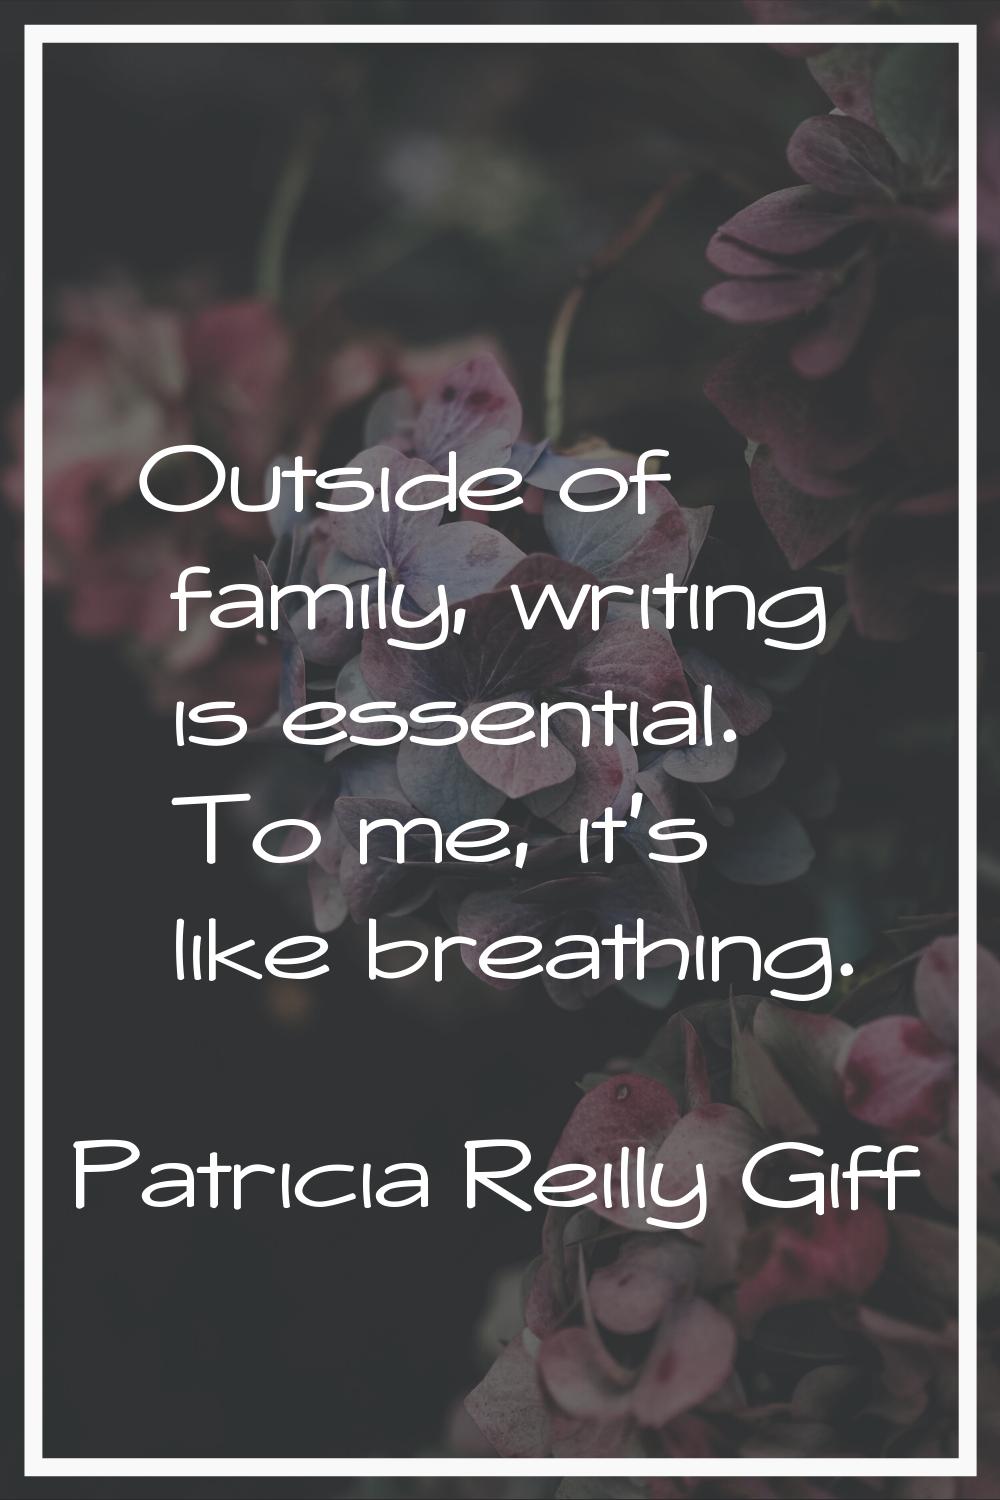 Outside of family, writing is essential. To me, it's like breathing.